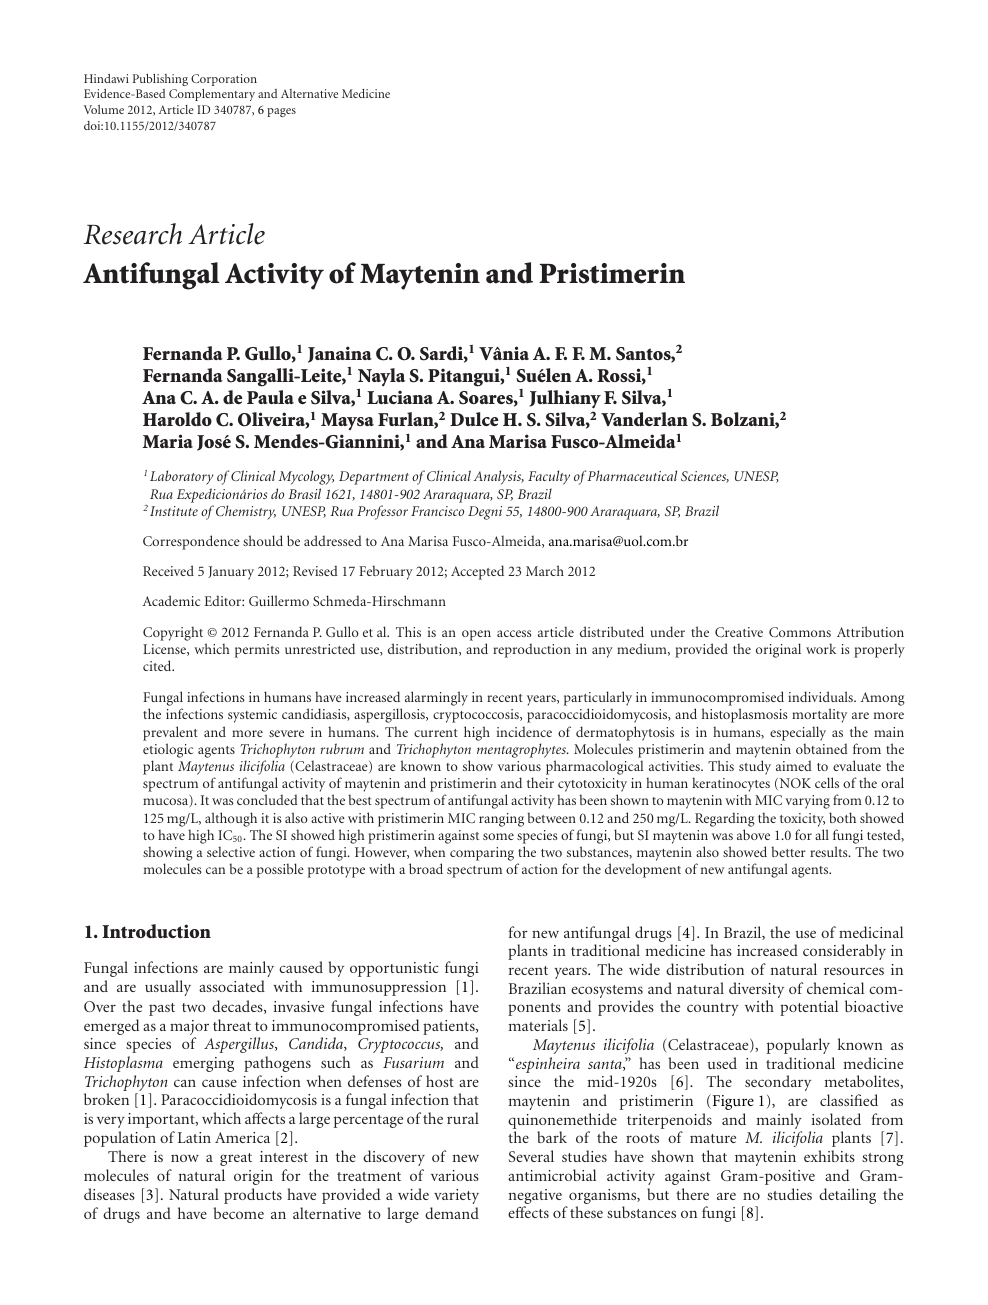 Antifungal Activity Of Maytenin And Pristimerin Topic Of Research Paper In Biological Sciences Download Scholarly Article Pdf And Read For Free On Cyberleninka Open Science Hub